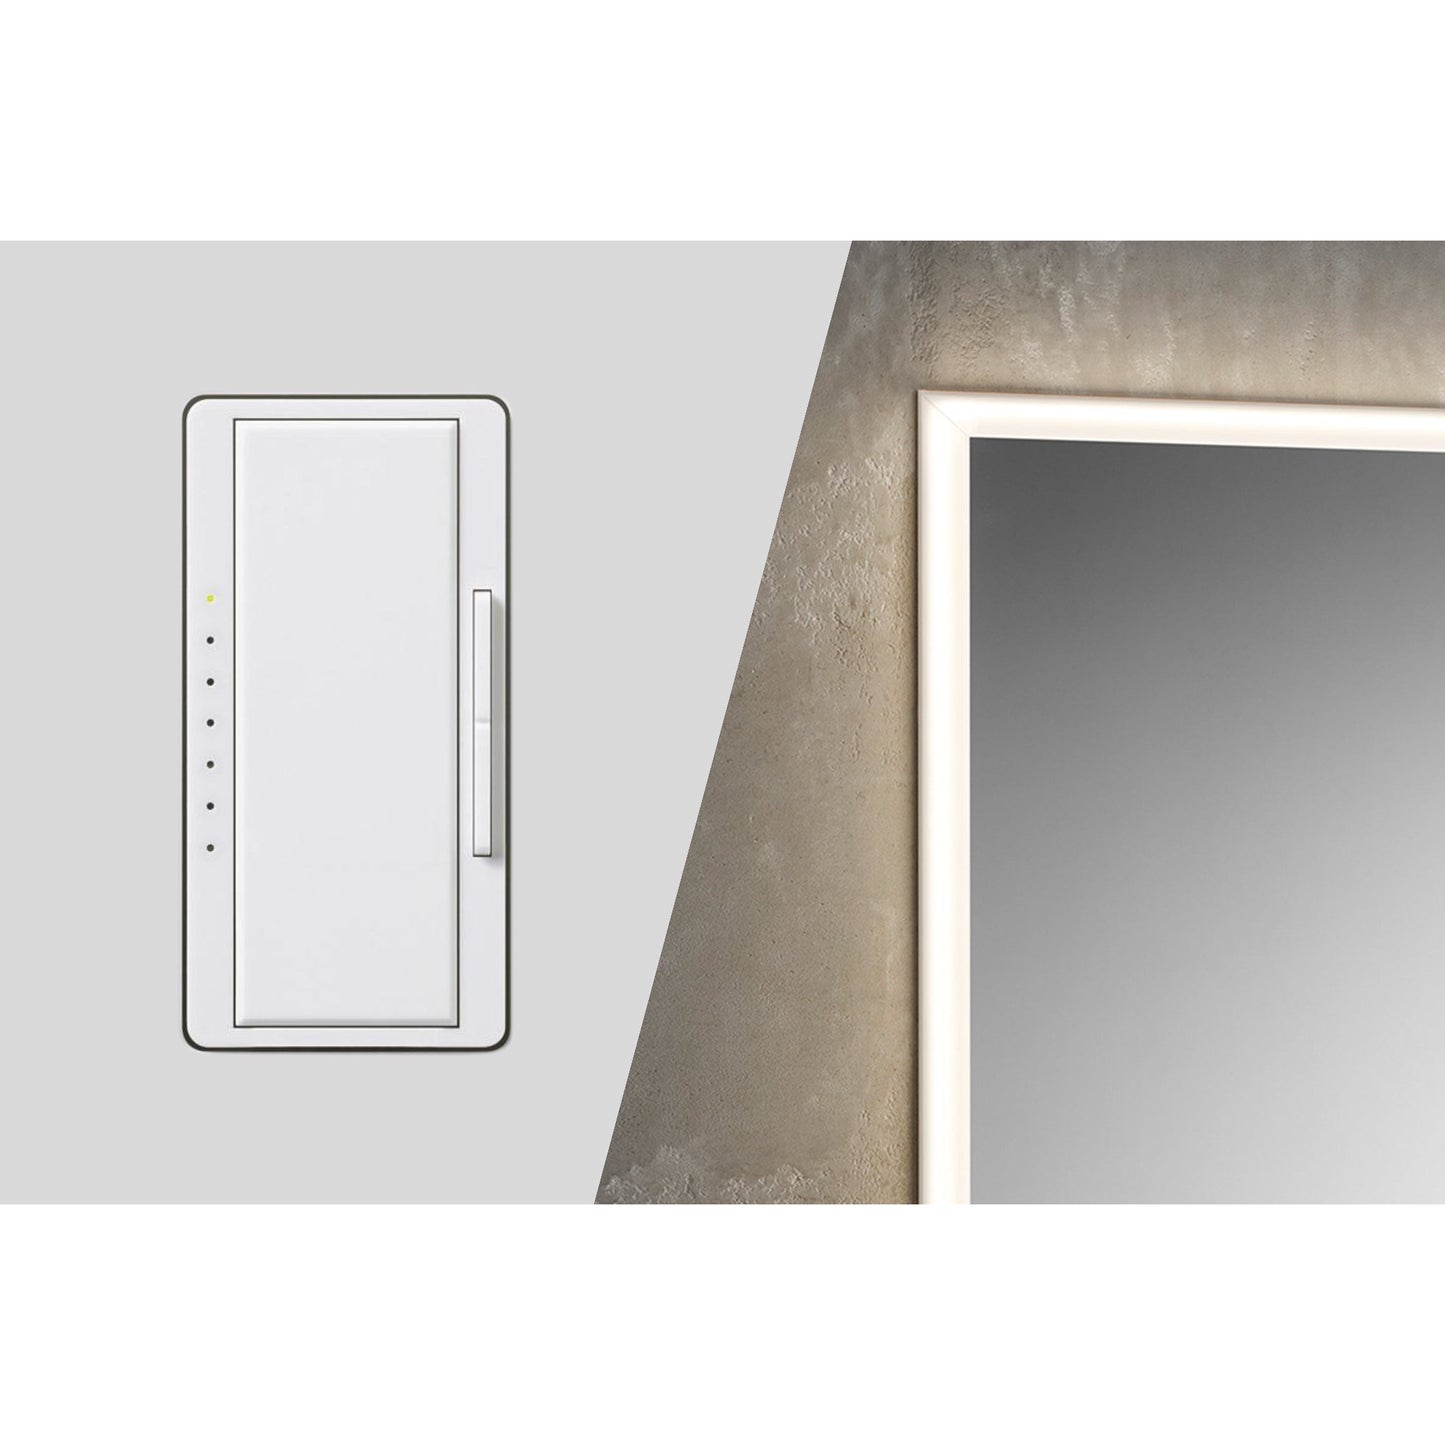 Sidler Quadro 20" x 36" 4000K Single Right Hinged Mirror Door Anodized Aluminum Medicine Cabinet With Night Light Function, Built-in GFCI Outlet and USB port